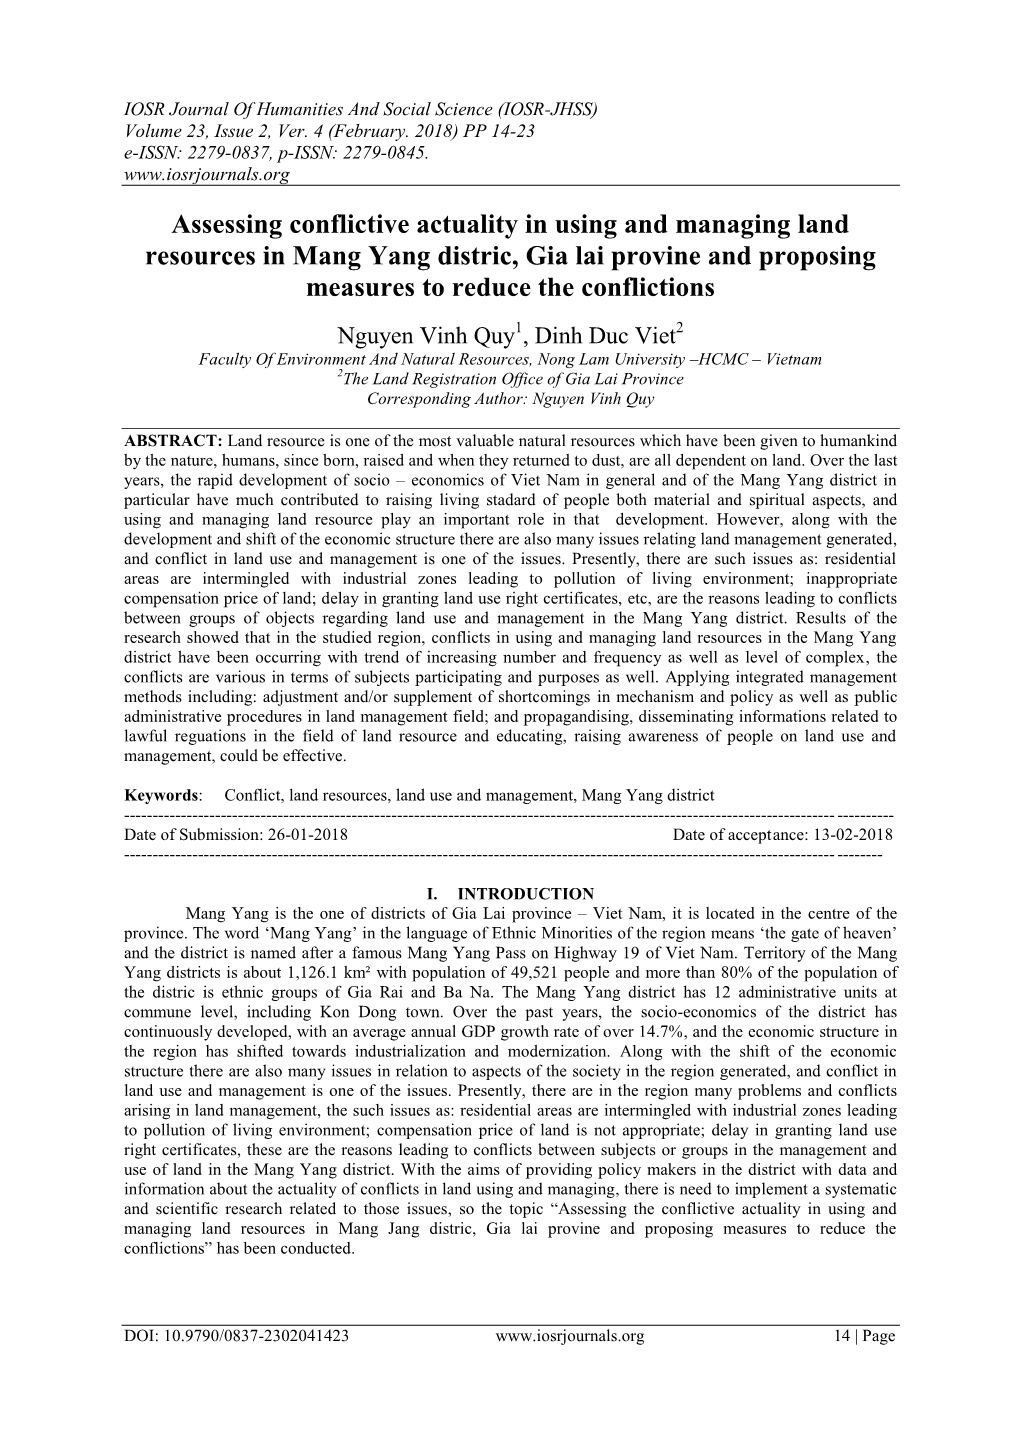 Assessing Conflictive Actuality in Using and Managing Land Resources in Mang Yang Distric, Gia Lai Provine and Proposing Measures to Reduce the Conflictions